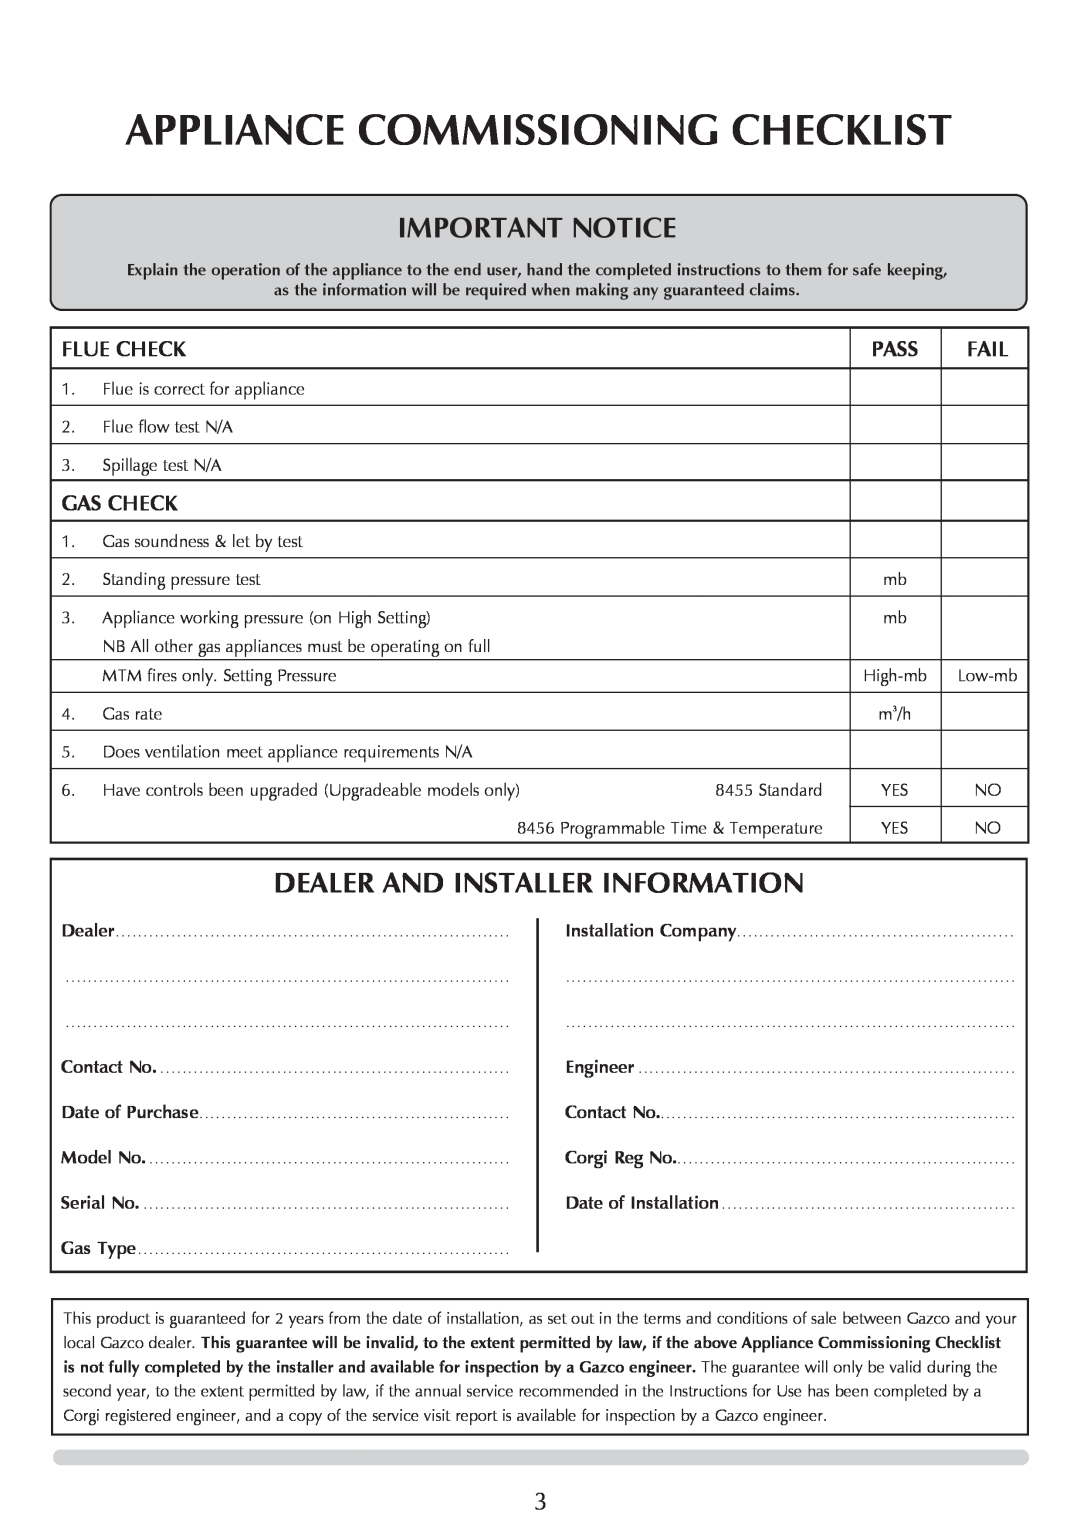 Stovax 8544LUC-P8544LUC manual Appliance Commissioning Checklist, Flue Check, Pass, Fail, Gas Check, Important Notice 